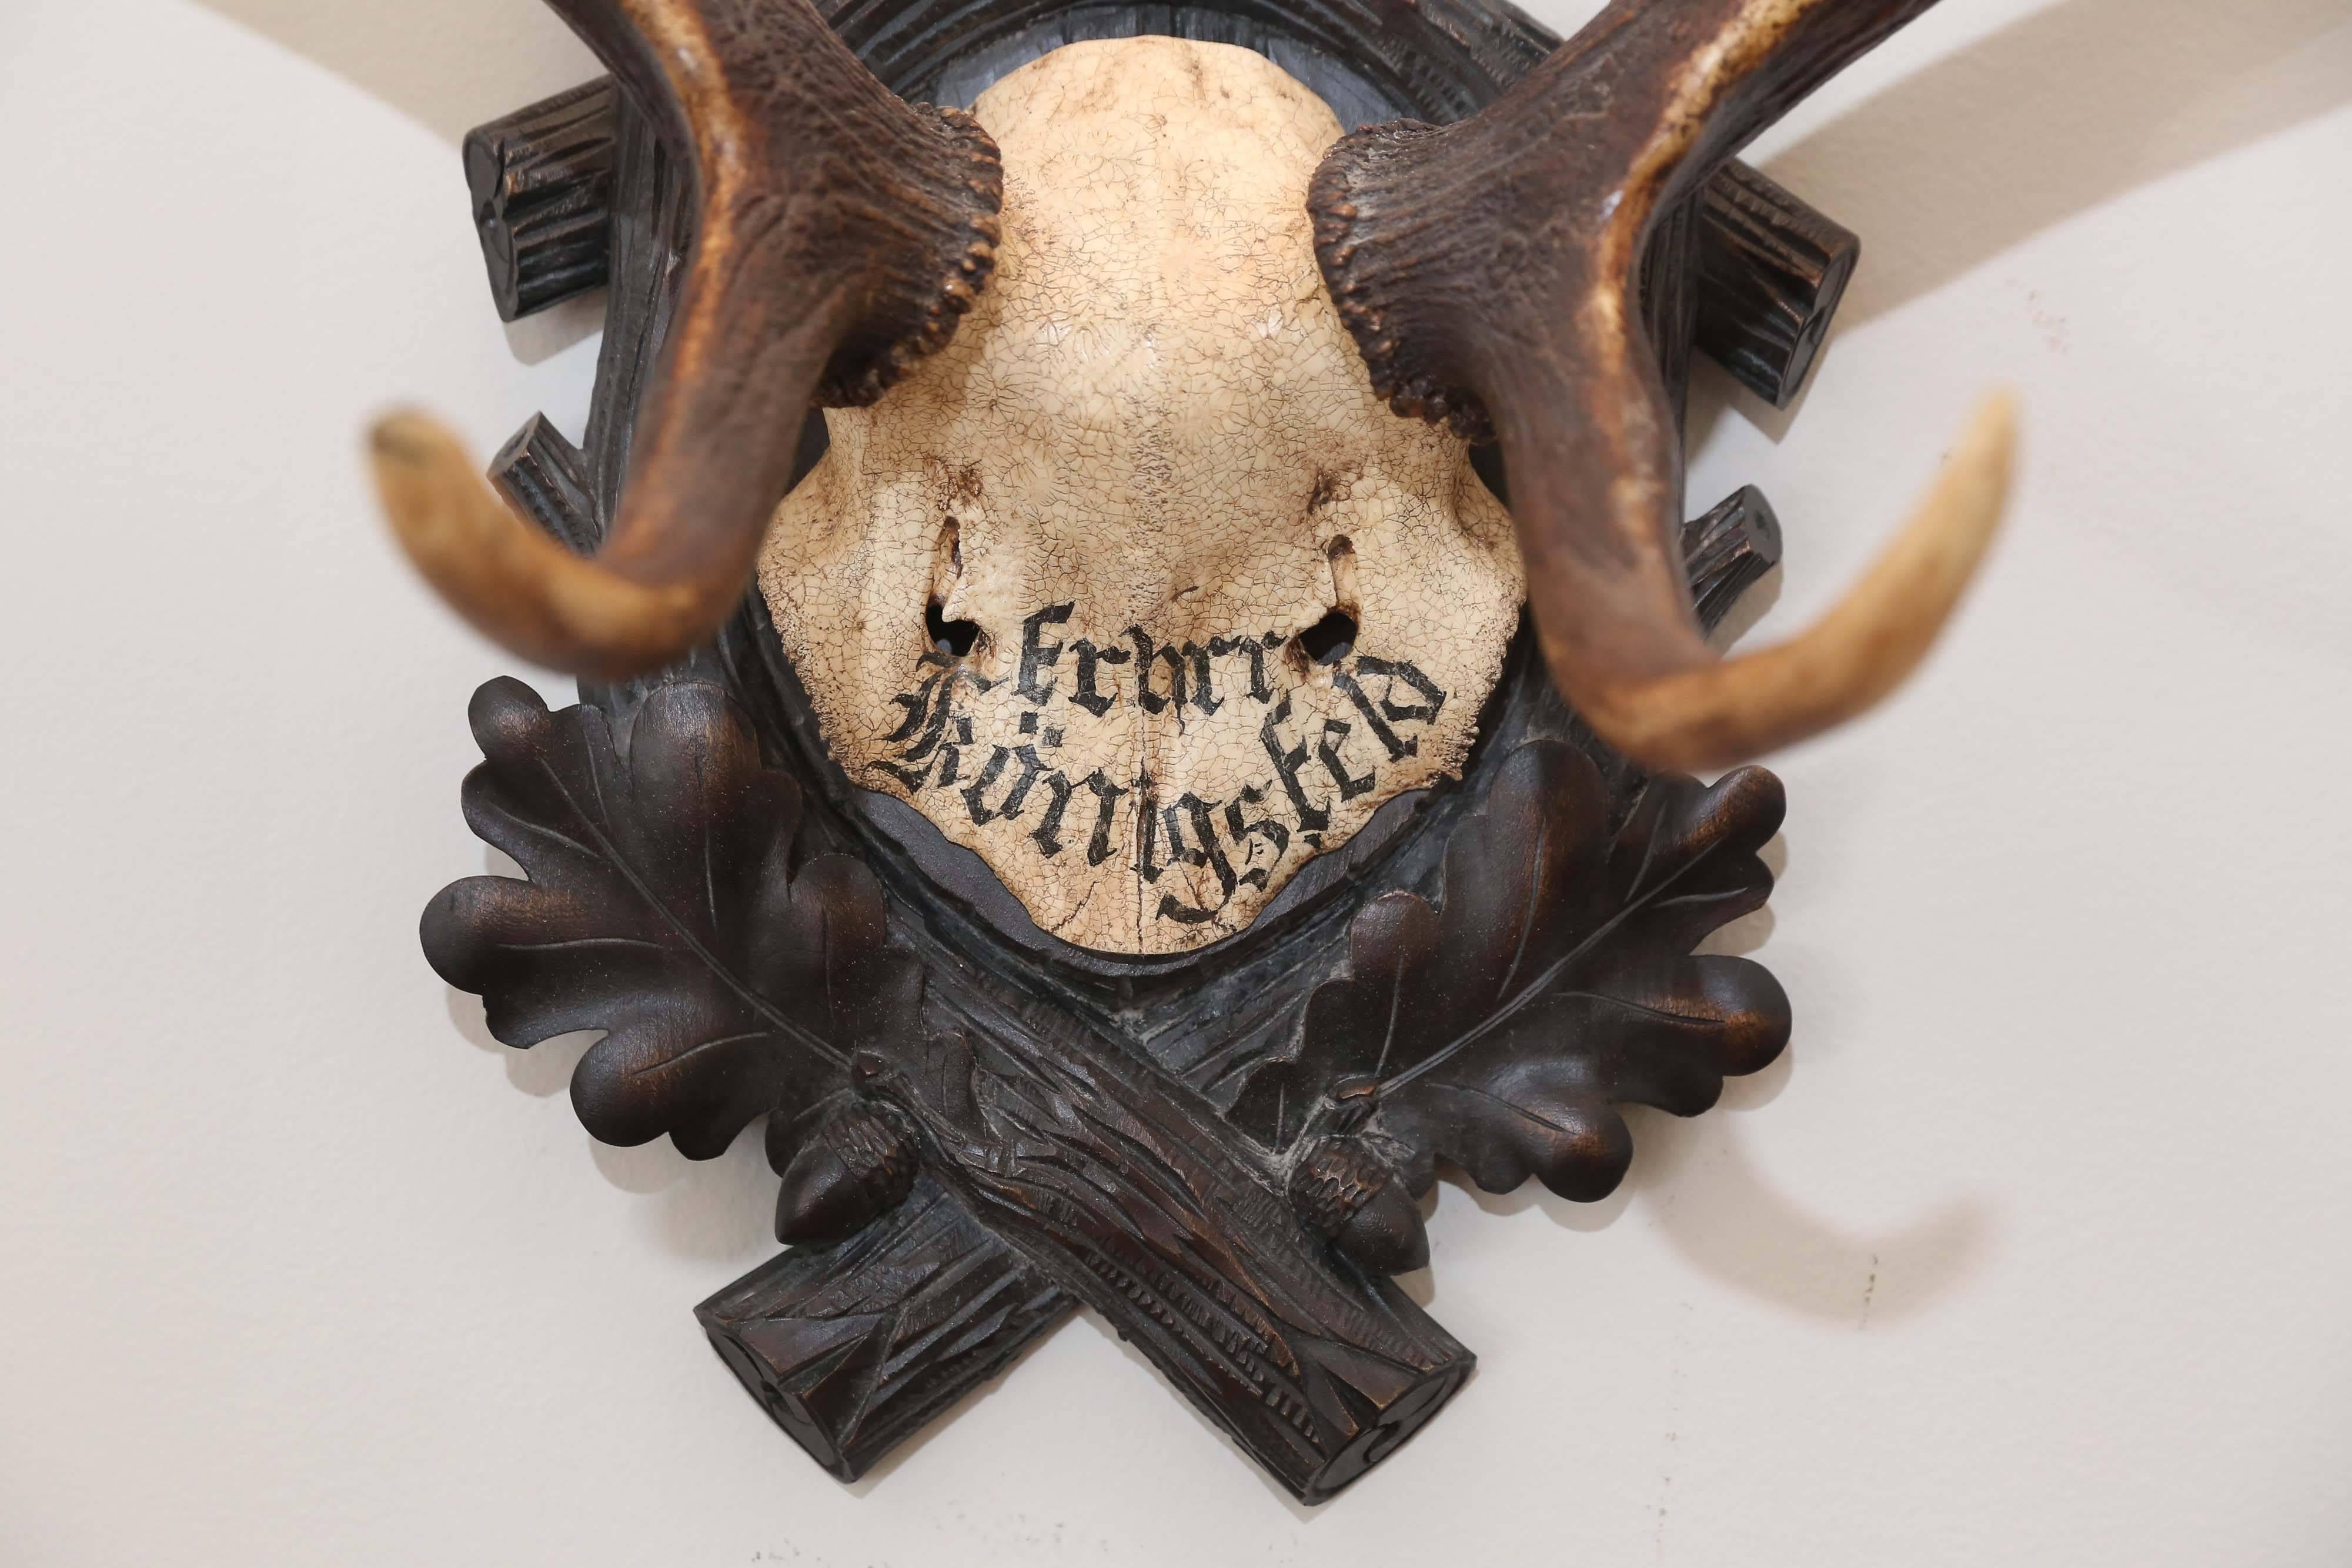 19th century fallow deer trophy from Emperor Franz Josef's castle at Eckartsau in the Southern Austrian Alps, a favorite hunting schloss of the Habsburg Royal family. This historic hunting trophy features the original Black Forest carved plaque and